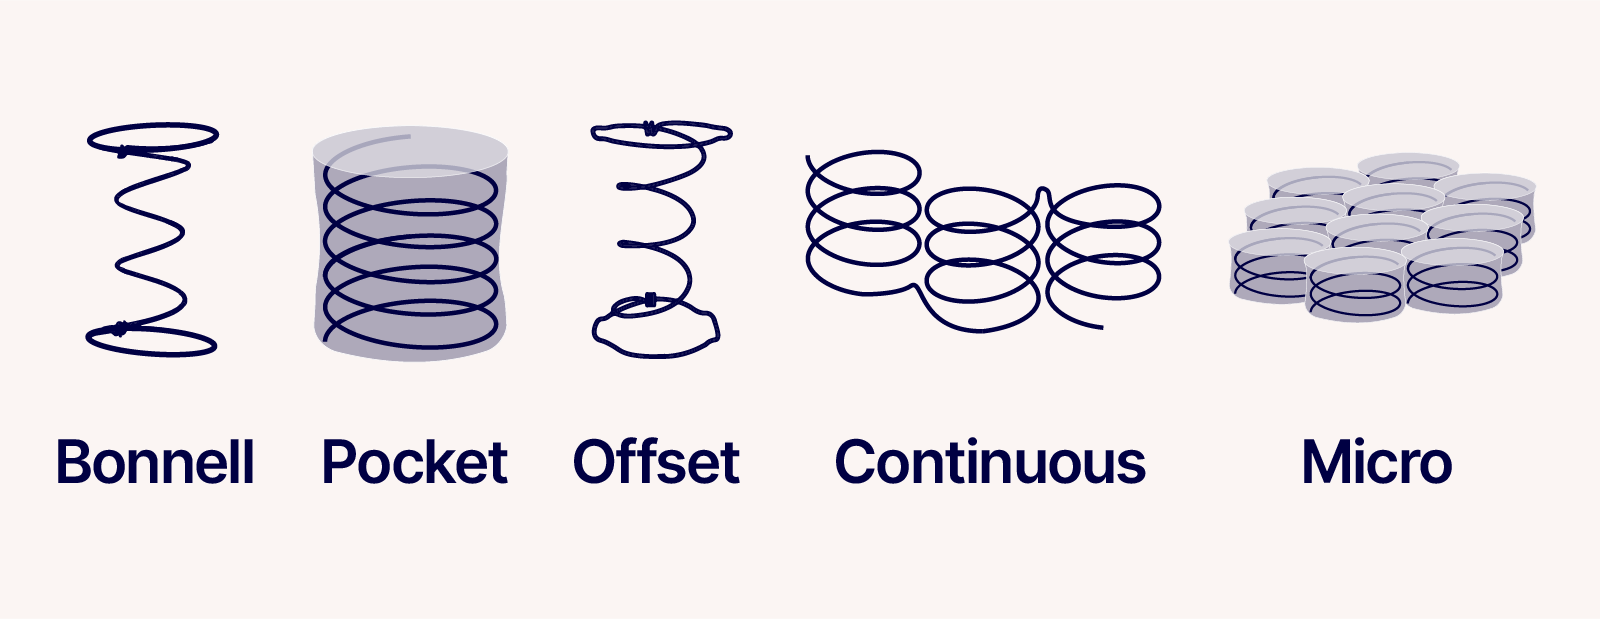 what is a hybrid mattress: illustrations showing the coil design for bonnell coils, pocket coils, offset coils, continuous coils, and micro coils